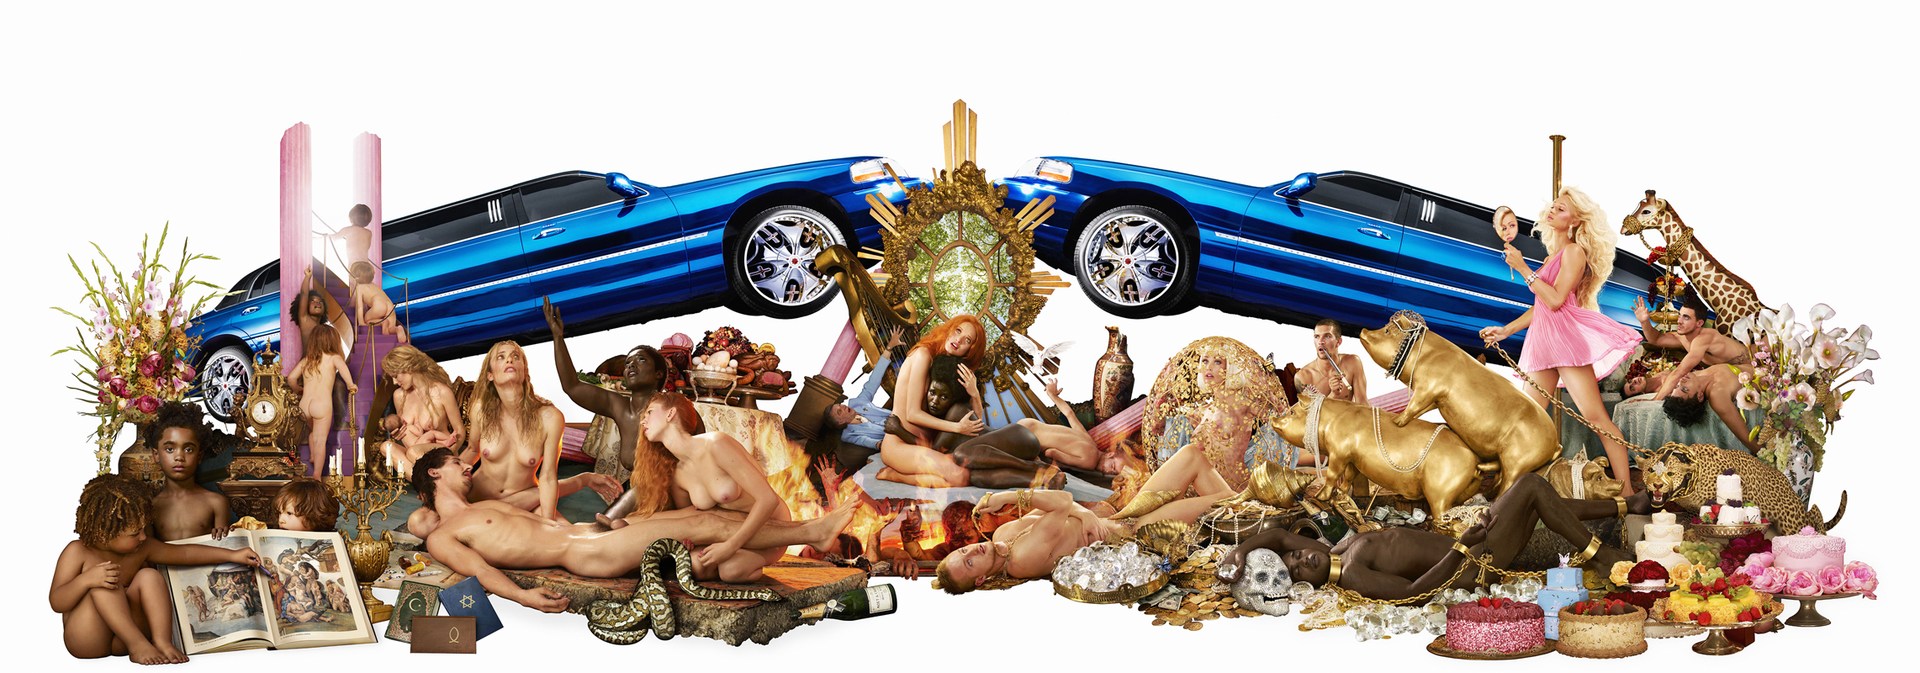 David LaChapelle | Selected Works | Decadence - in cooperation with Fred Torres Collaborations | 28